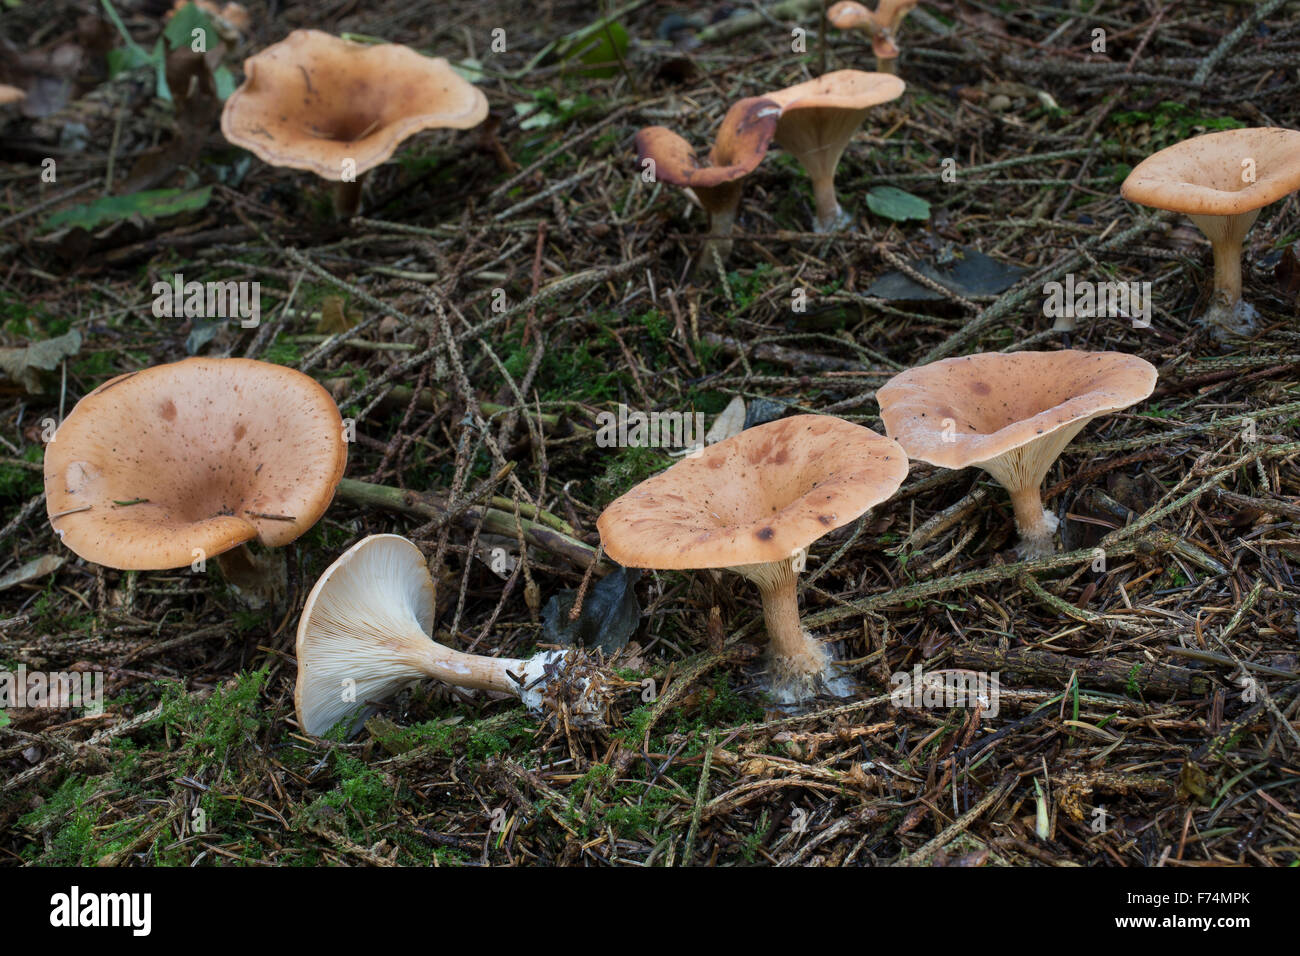 Tawny Funnel Cap, Fuchsiger Röteltrichterling, Fuchsiger Rötelritterling, Rötel-Trichterling, Lepista flaccida, Clitocybe Stock Photo